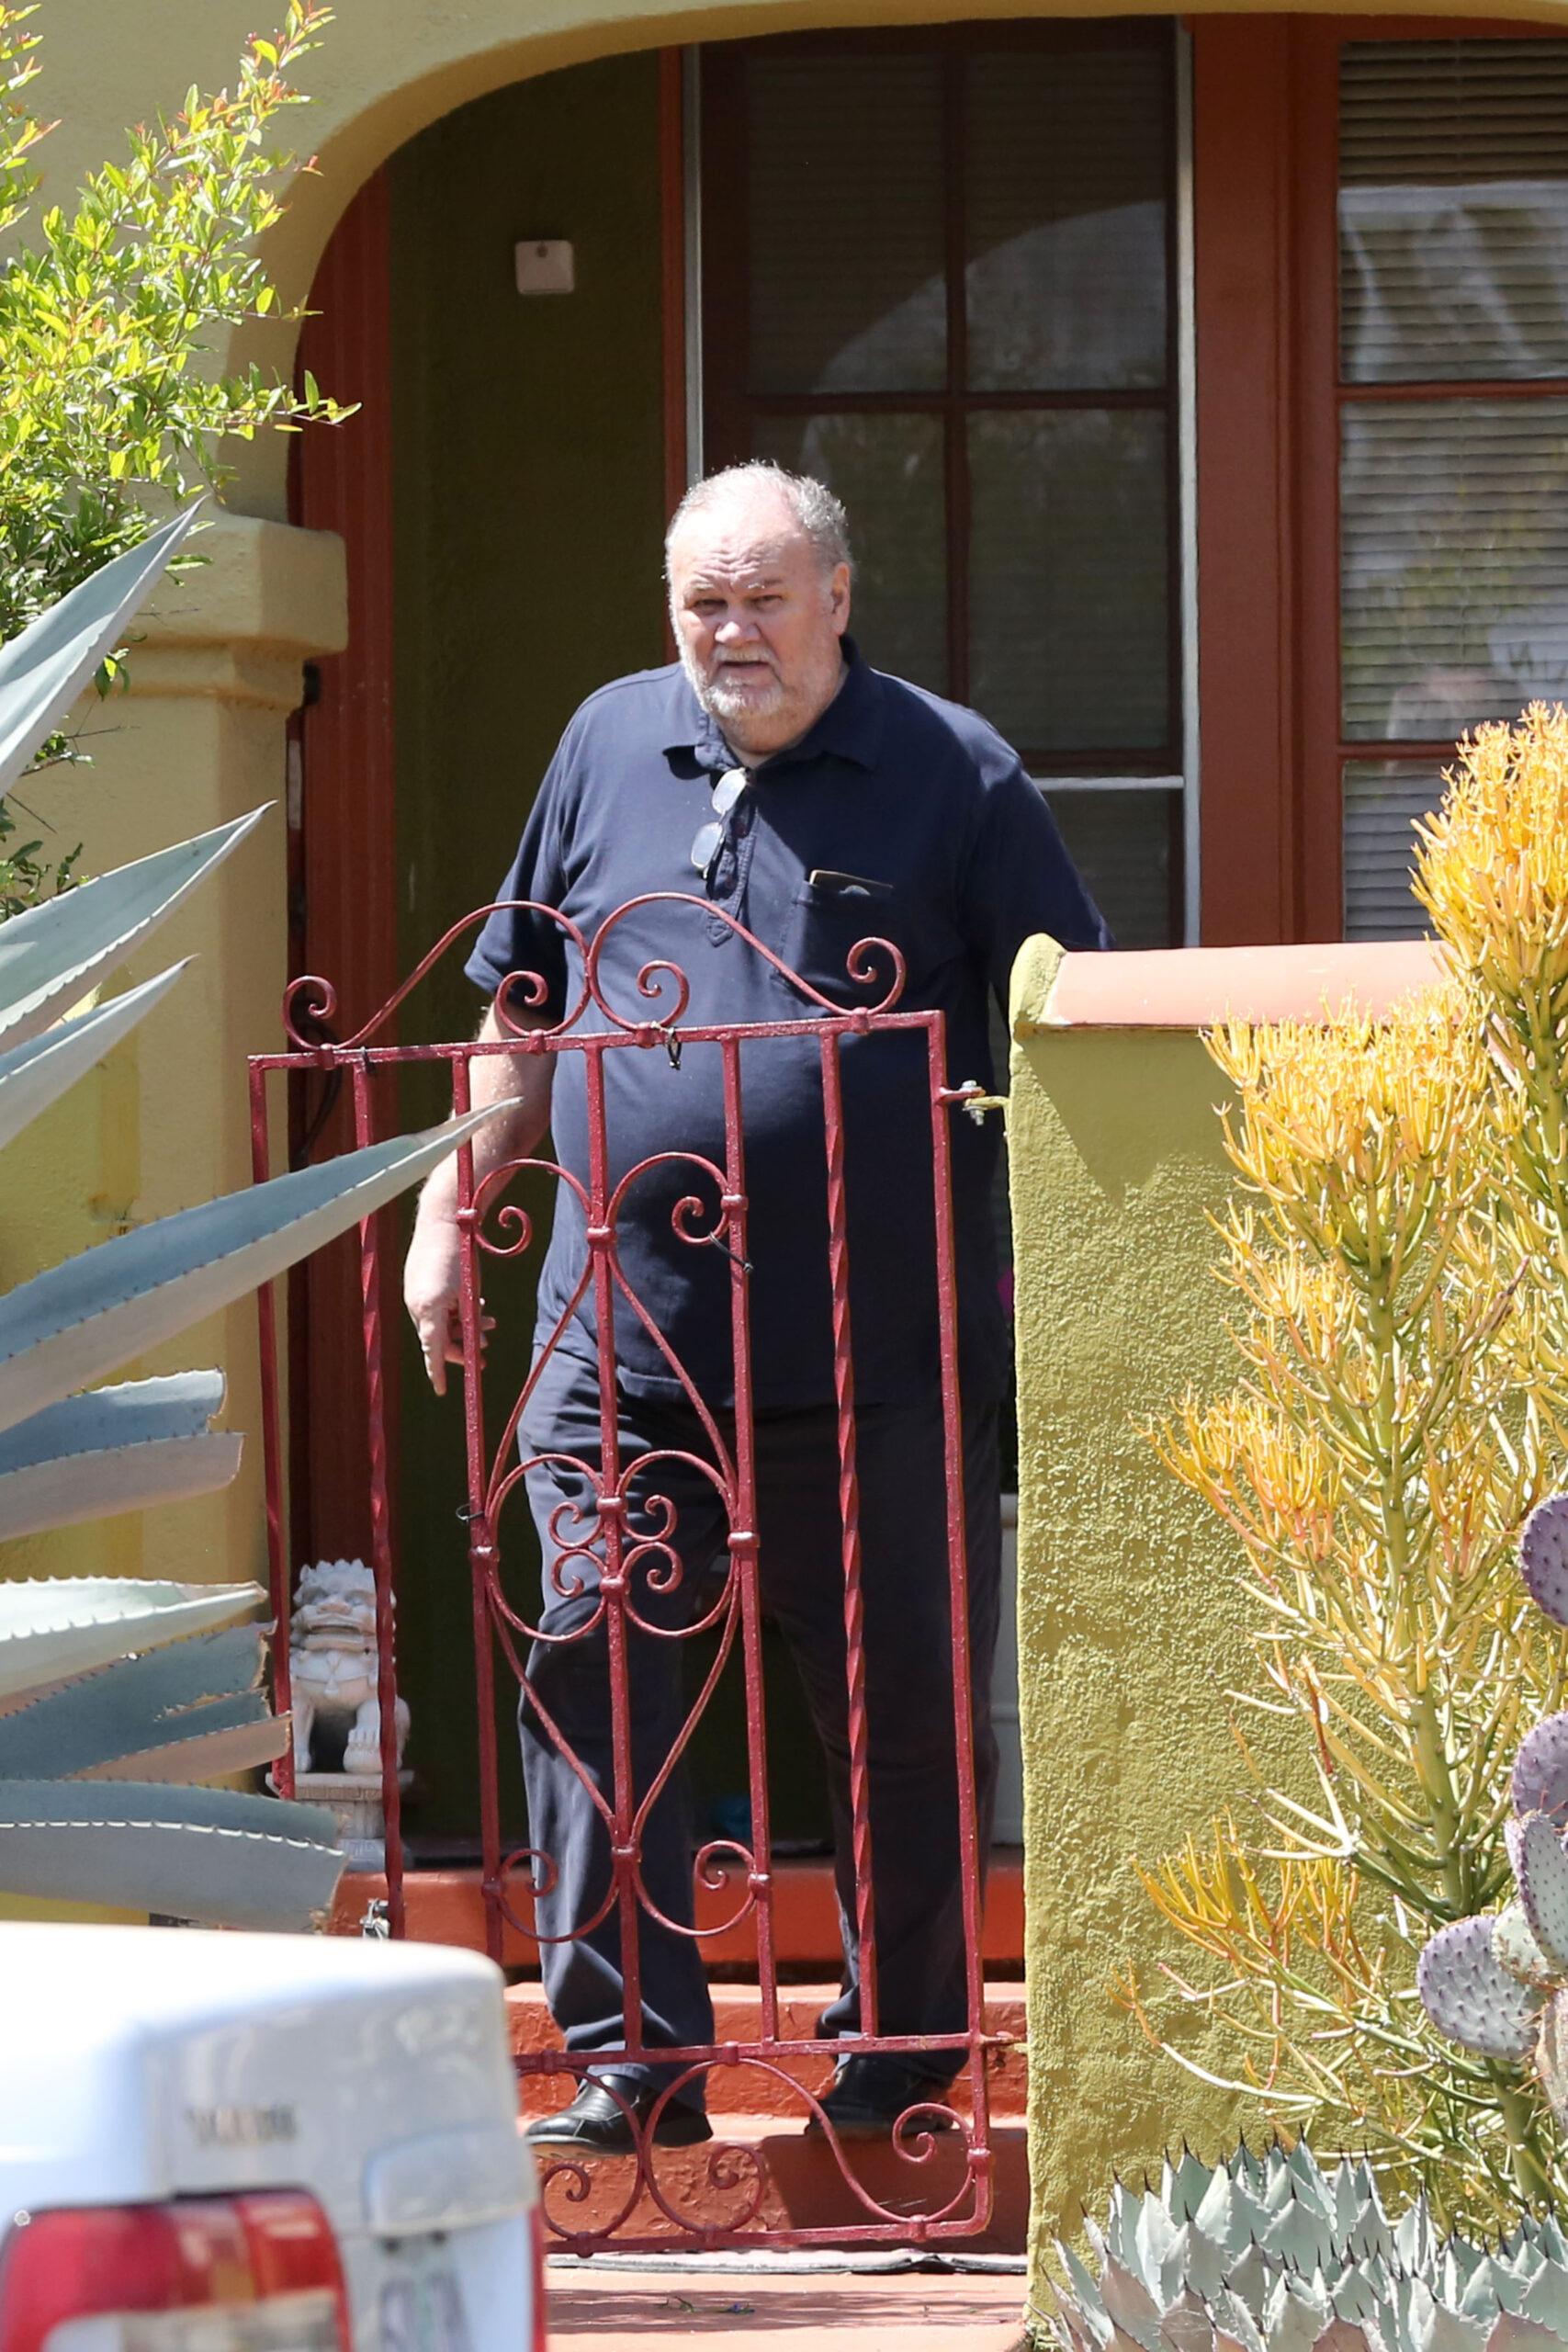 Meghan Markle's father Thomas Markle drops off flowers at Meghan's mother Doria Ragland home days before the wedding